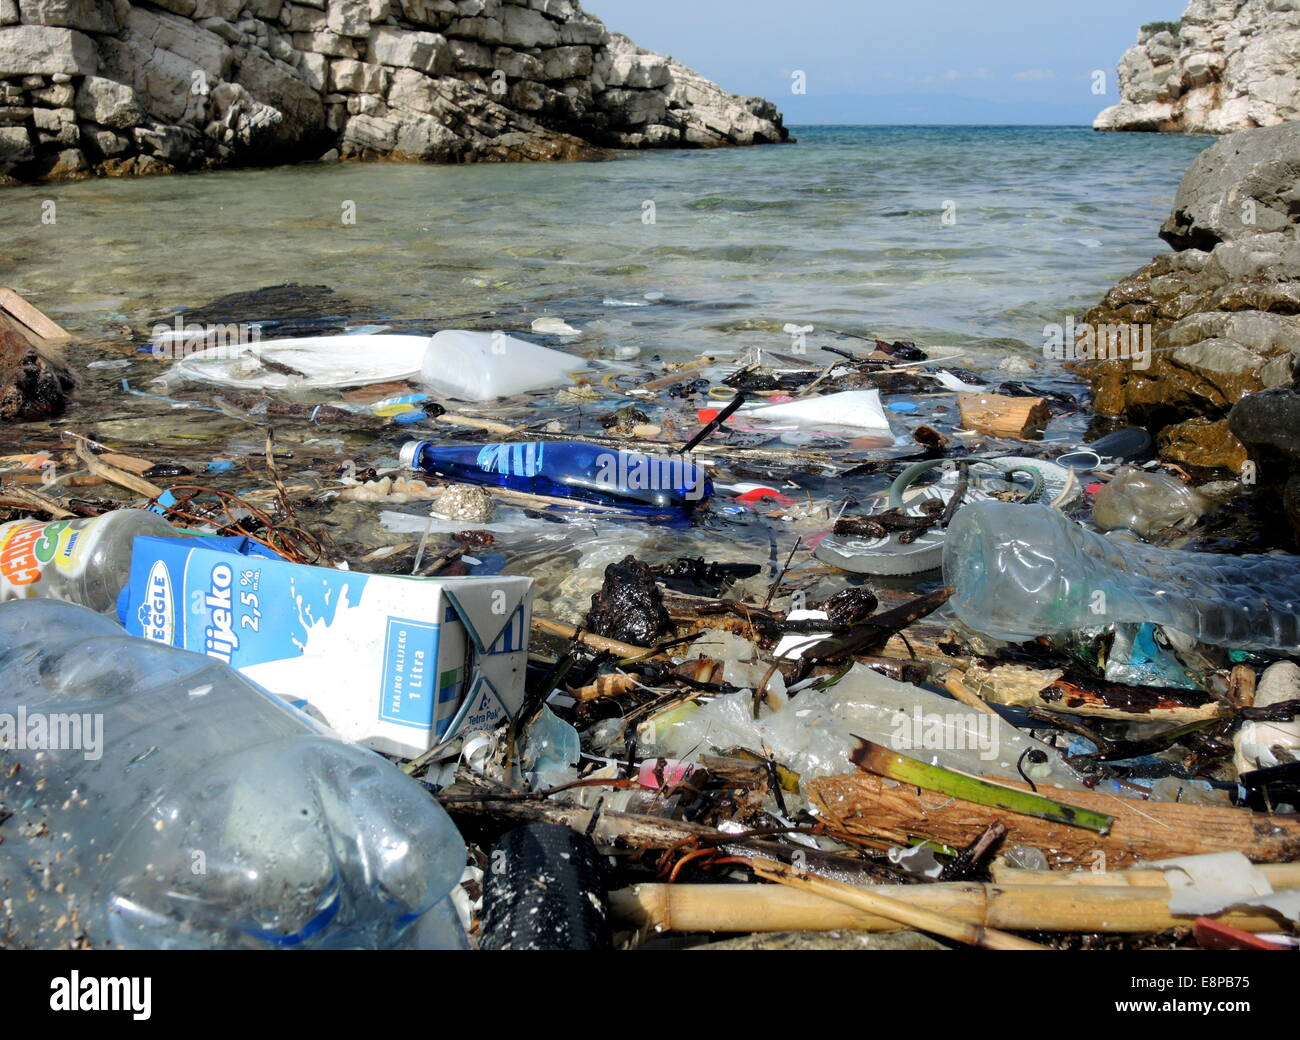 Washed up plastic waste on a beach along the coast of the croatian island of Lastovo, on September, 19, 2014. Stock Photo